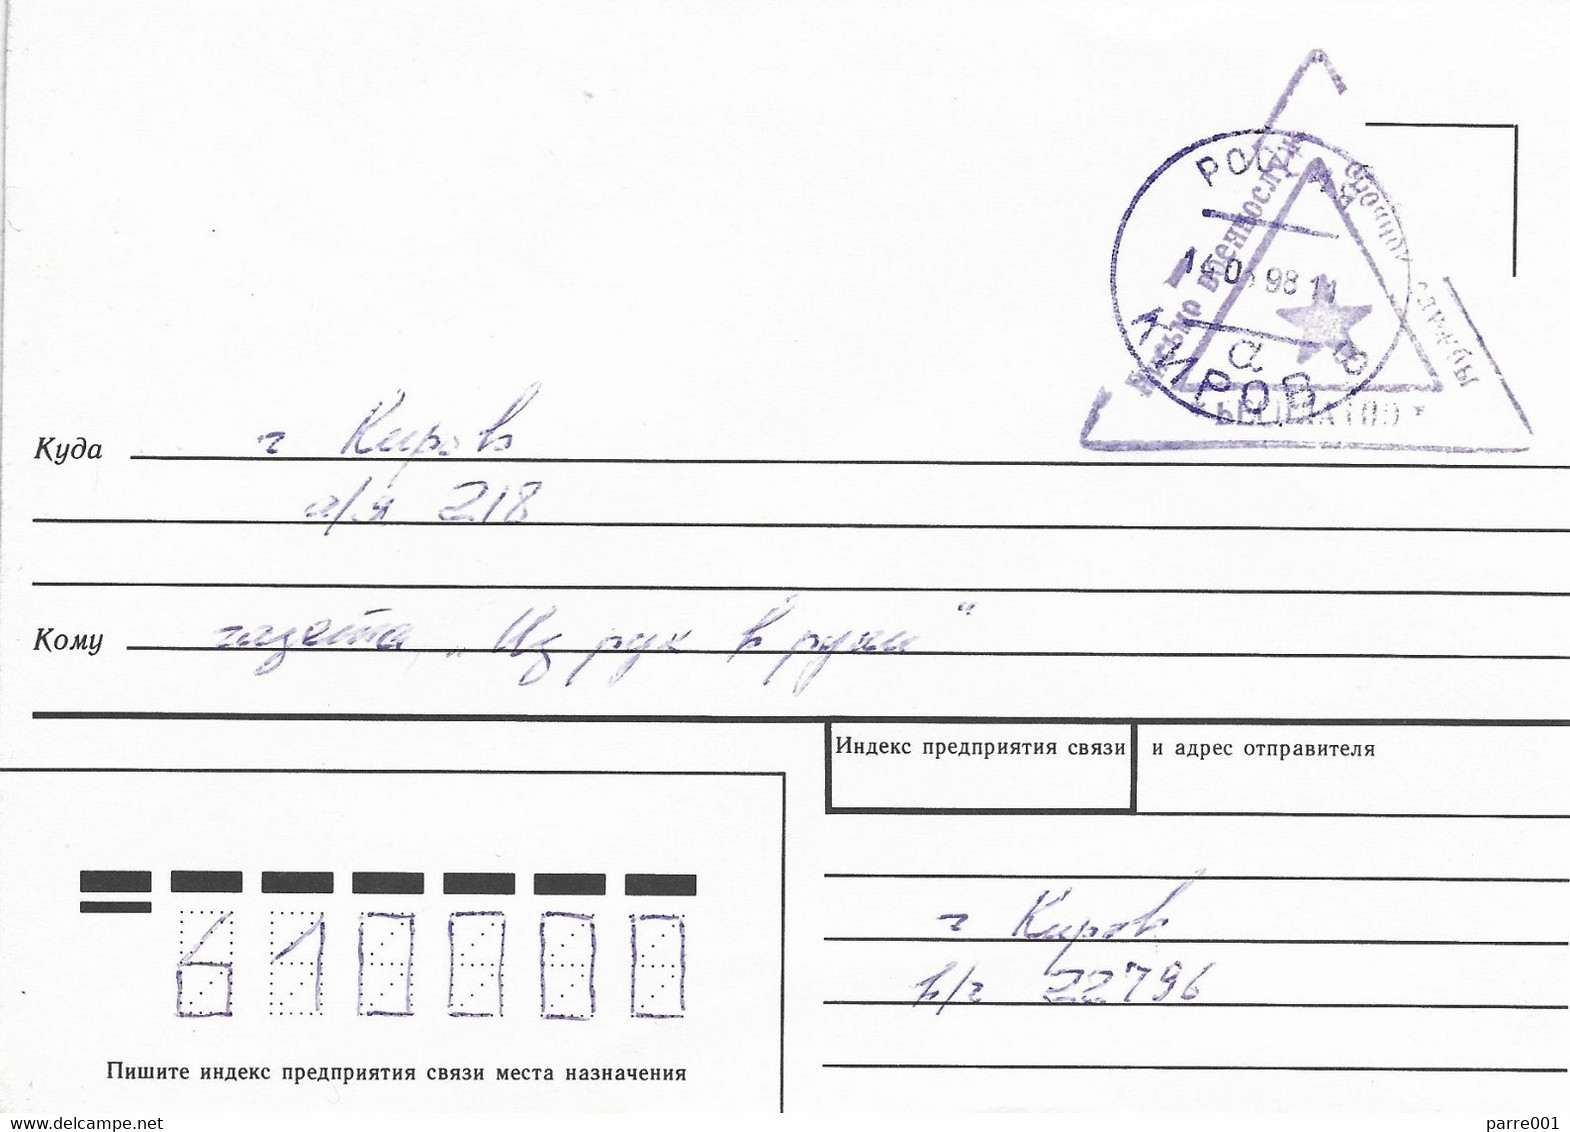 Russia 1998 Kirov Soldier's Letter/Free/Express Service Handstamp Cover - Covers & Documents